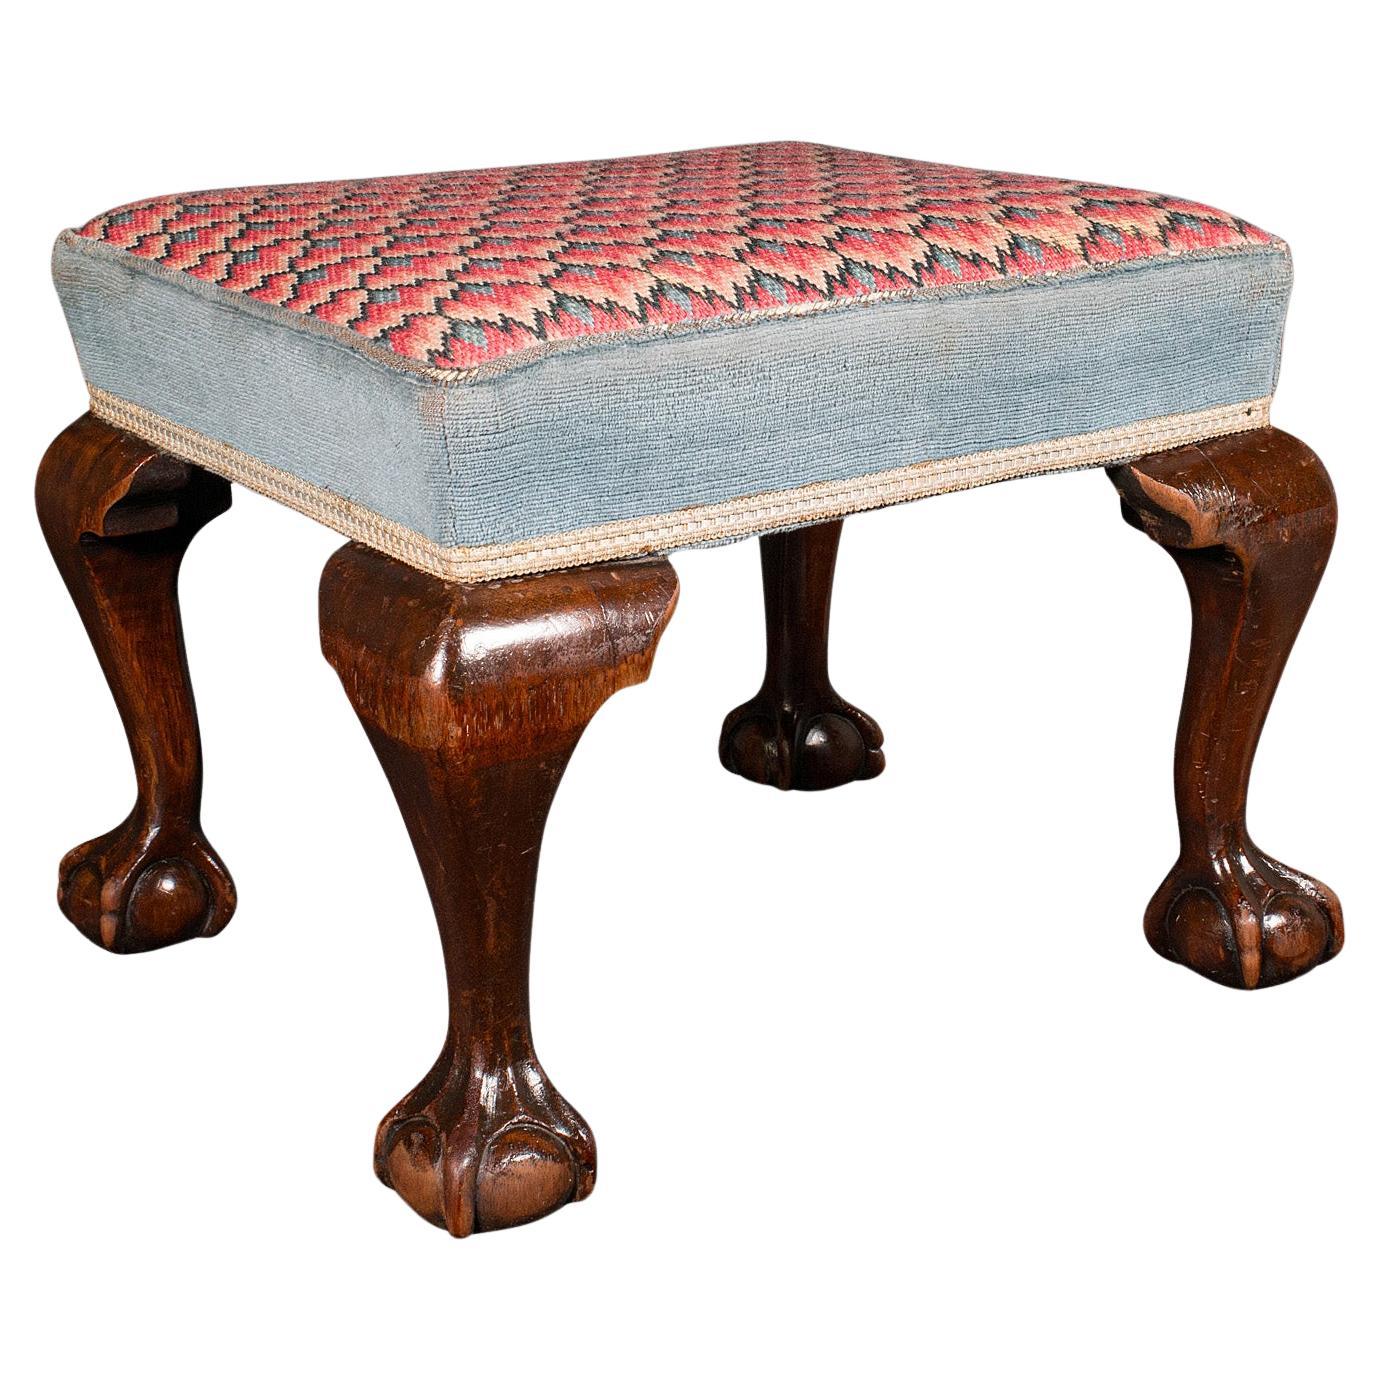 Antique Fireside Stool, English, Needlepoint, Footstool, Early Victorian, C.1850 For Sale